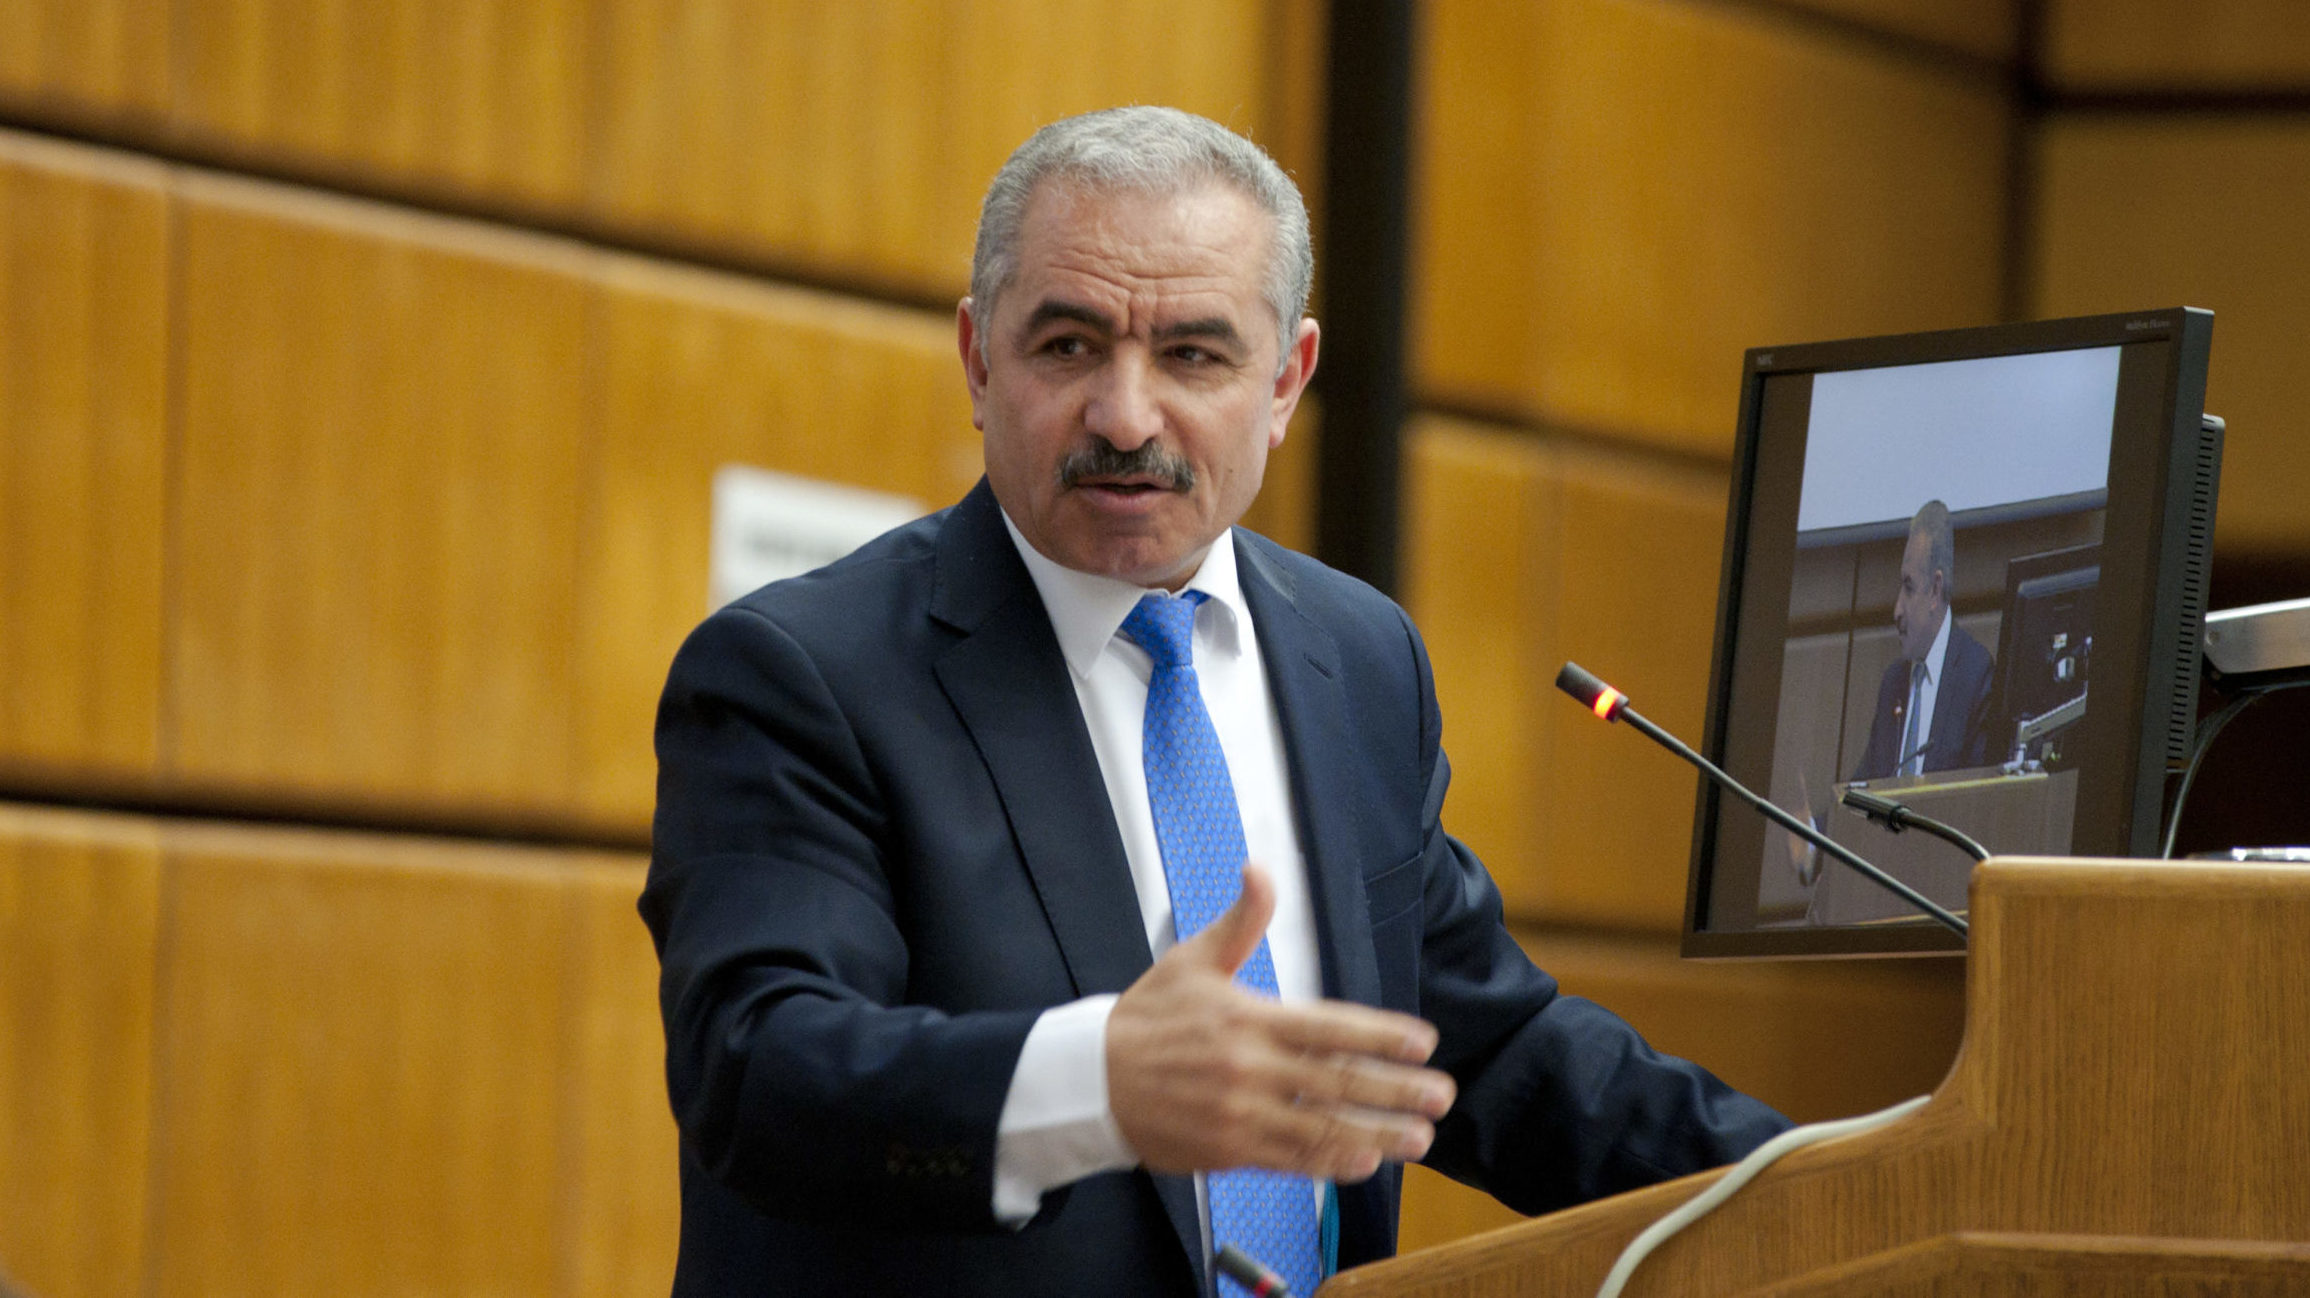 Palestinian Authority Prime Minister Shtayyeh To Resign, Technocratic Government Expected